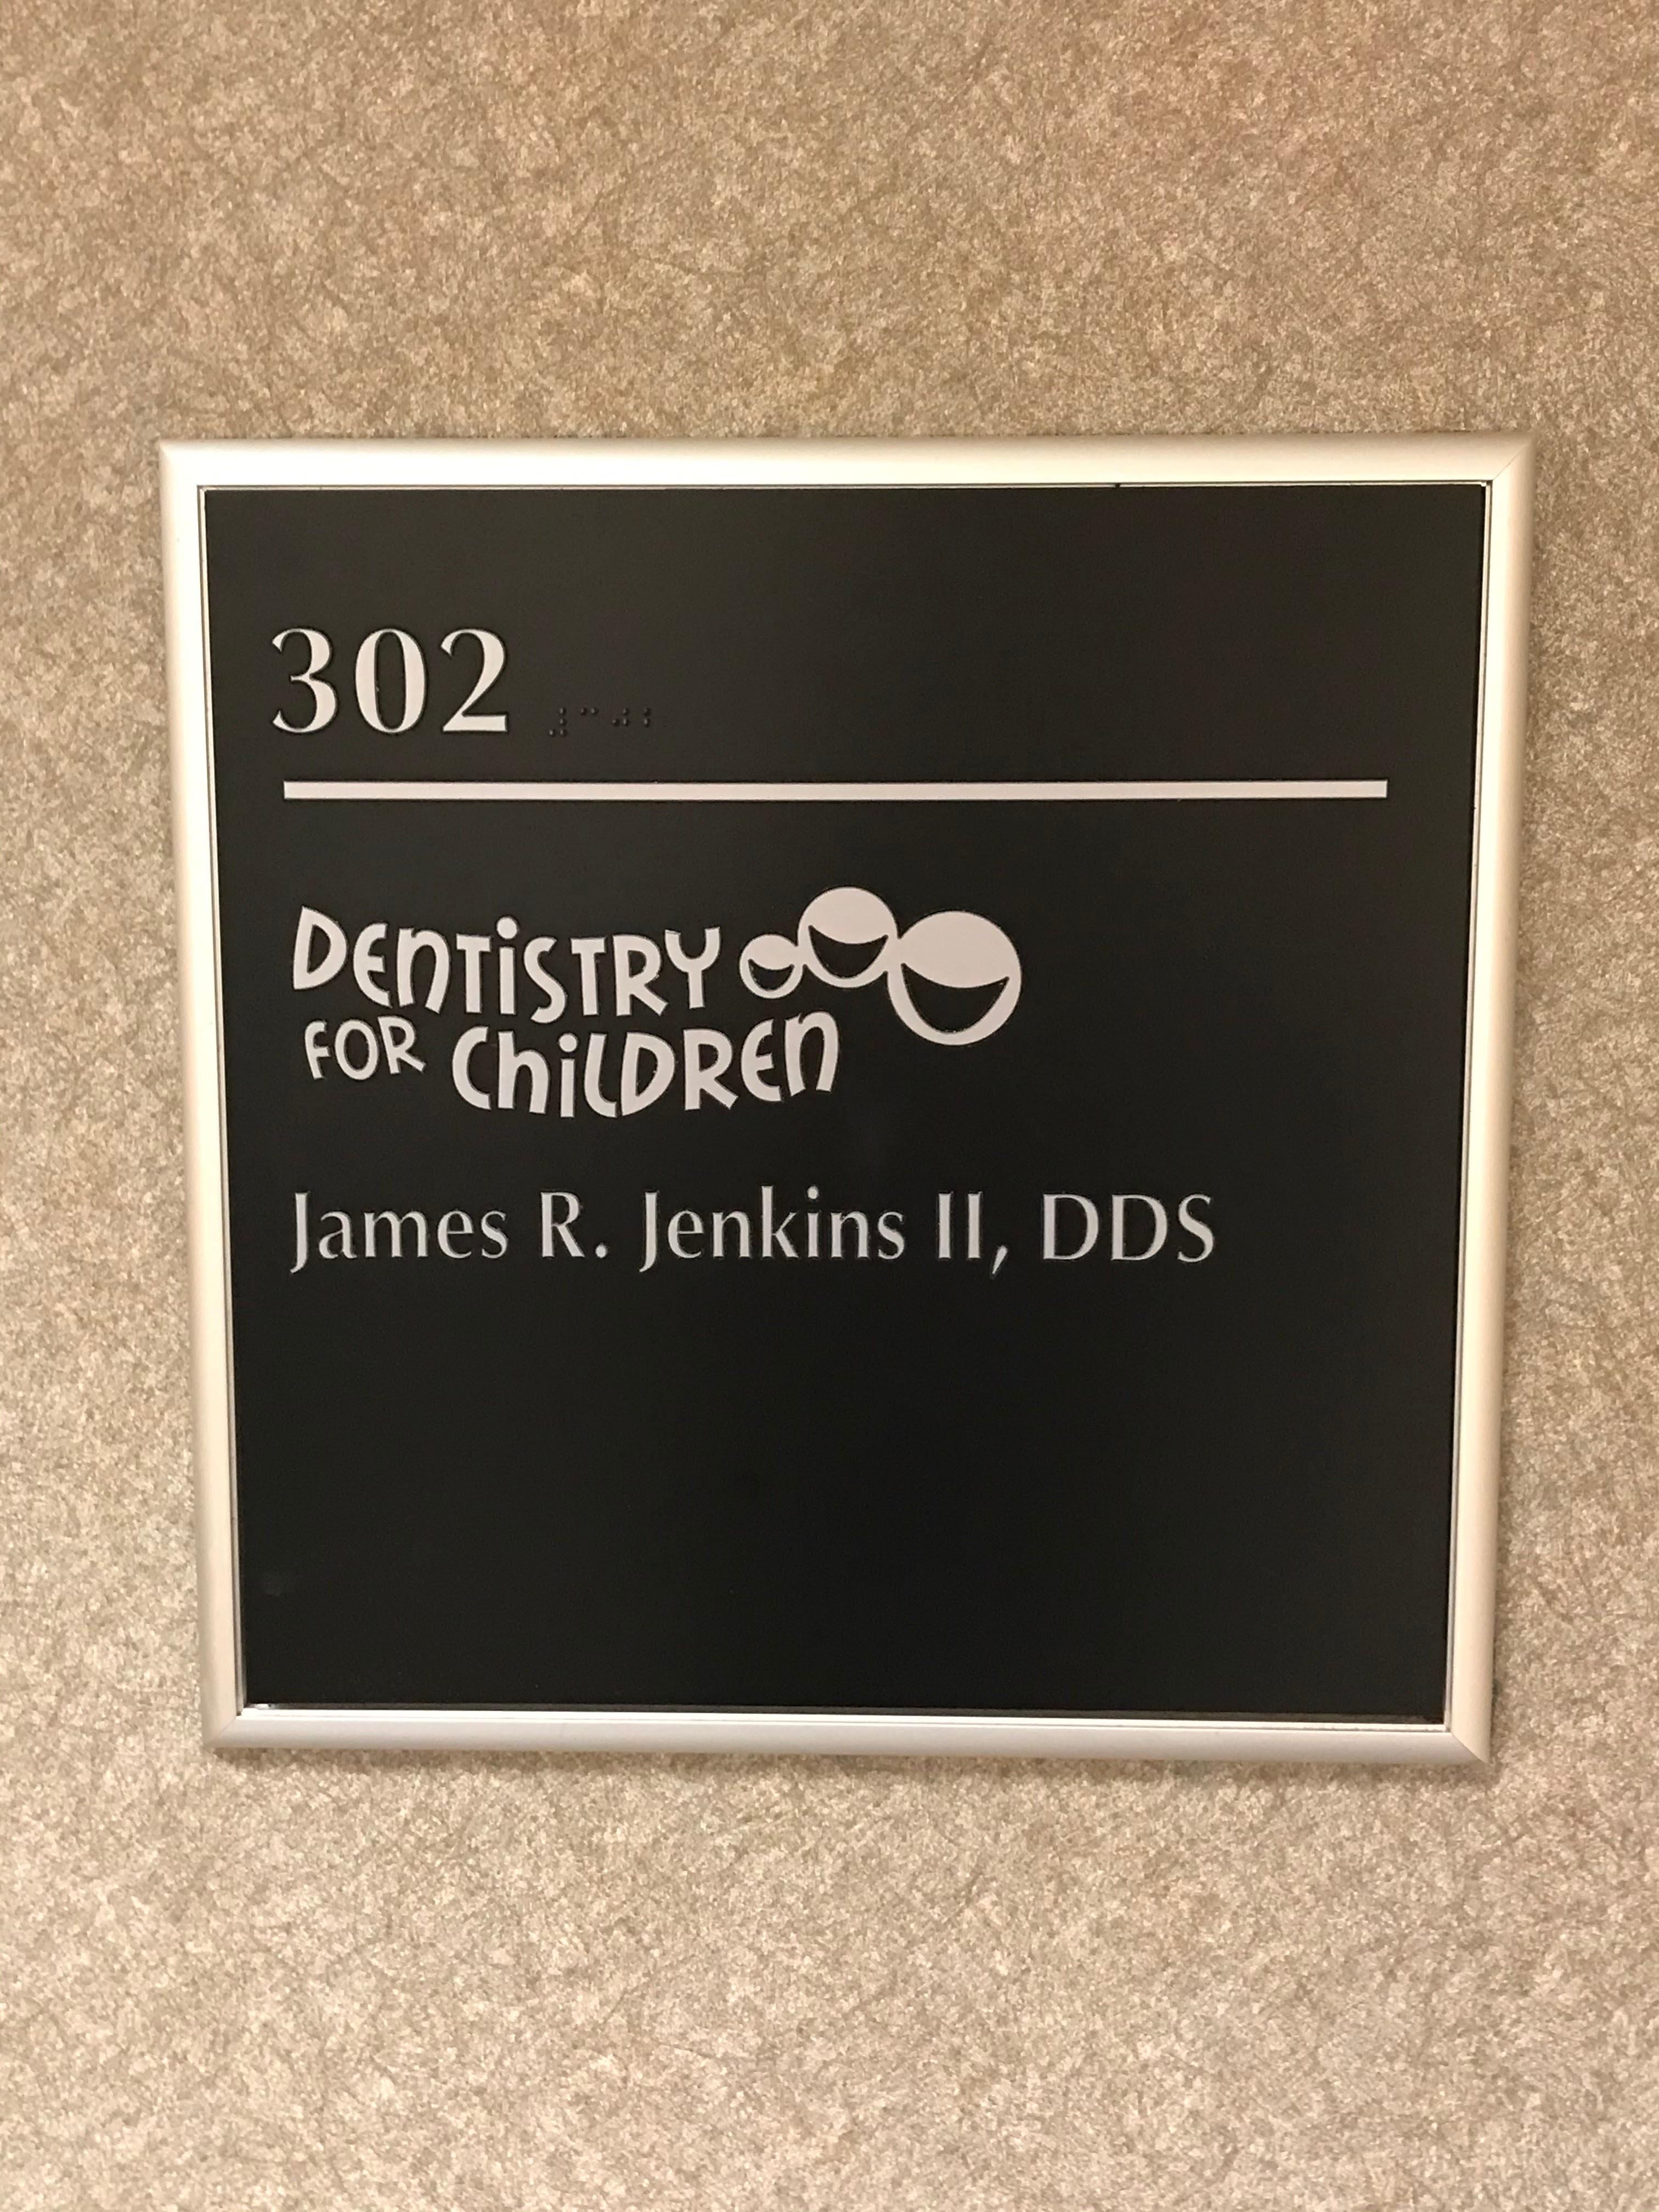 Dentistry for Children Maryland - Columbia Columbia (410)953-0111